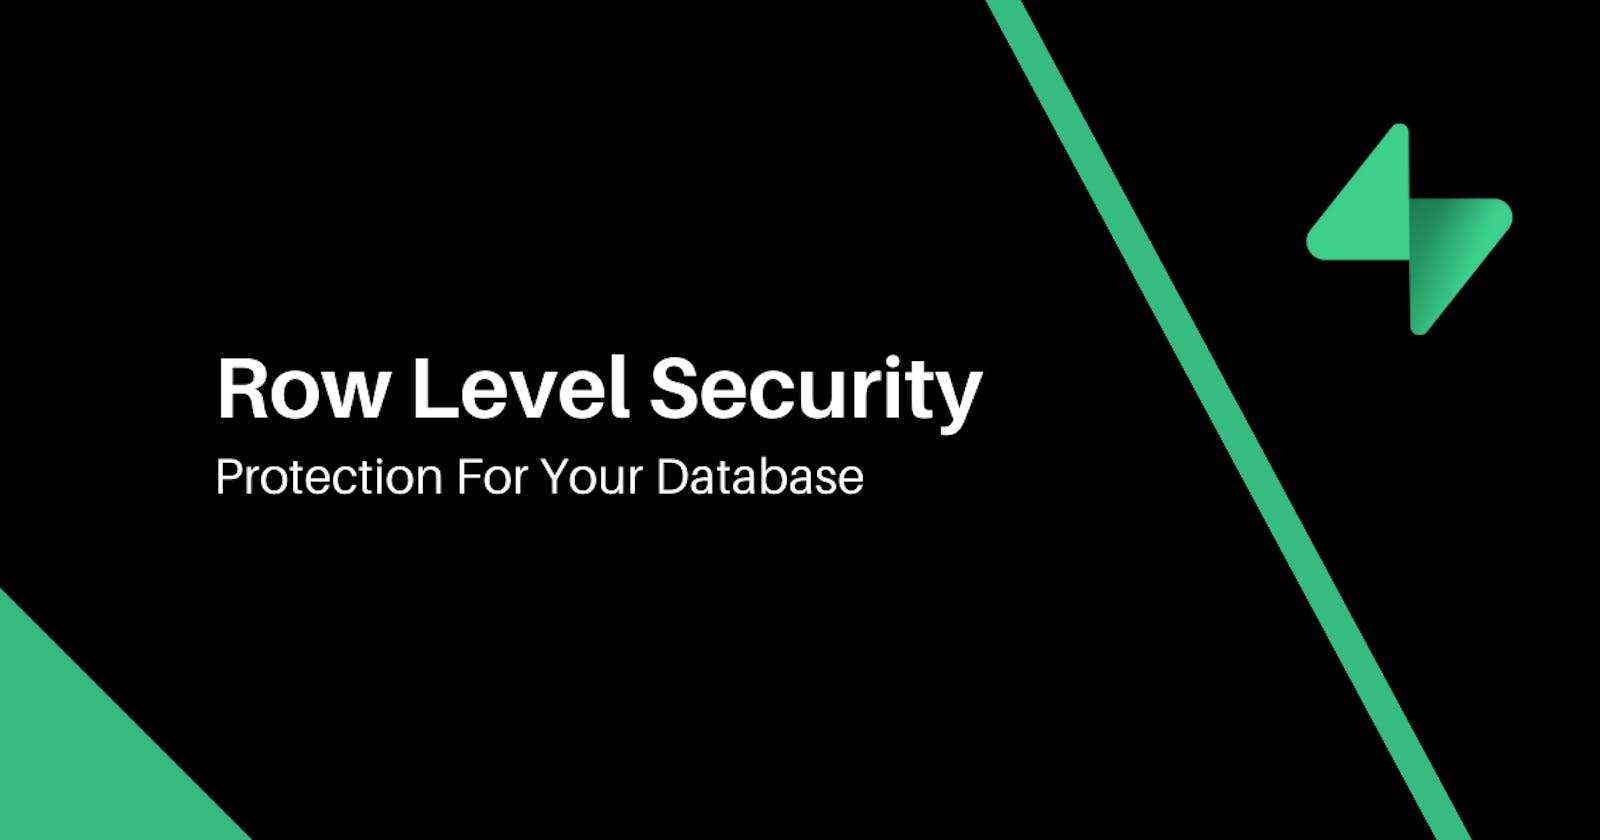 Fortify Your Database: Supabase's Row Level Security